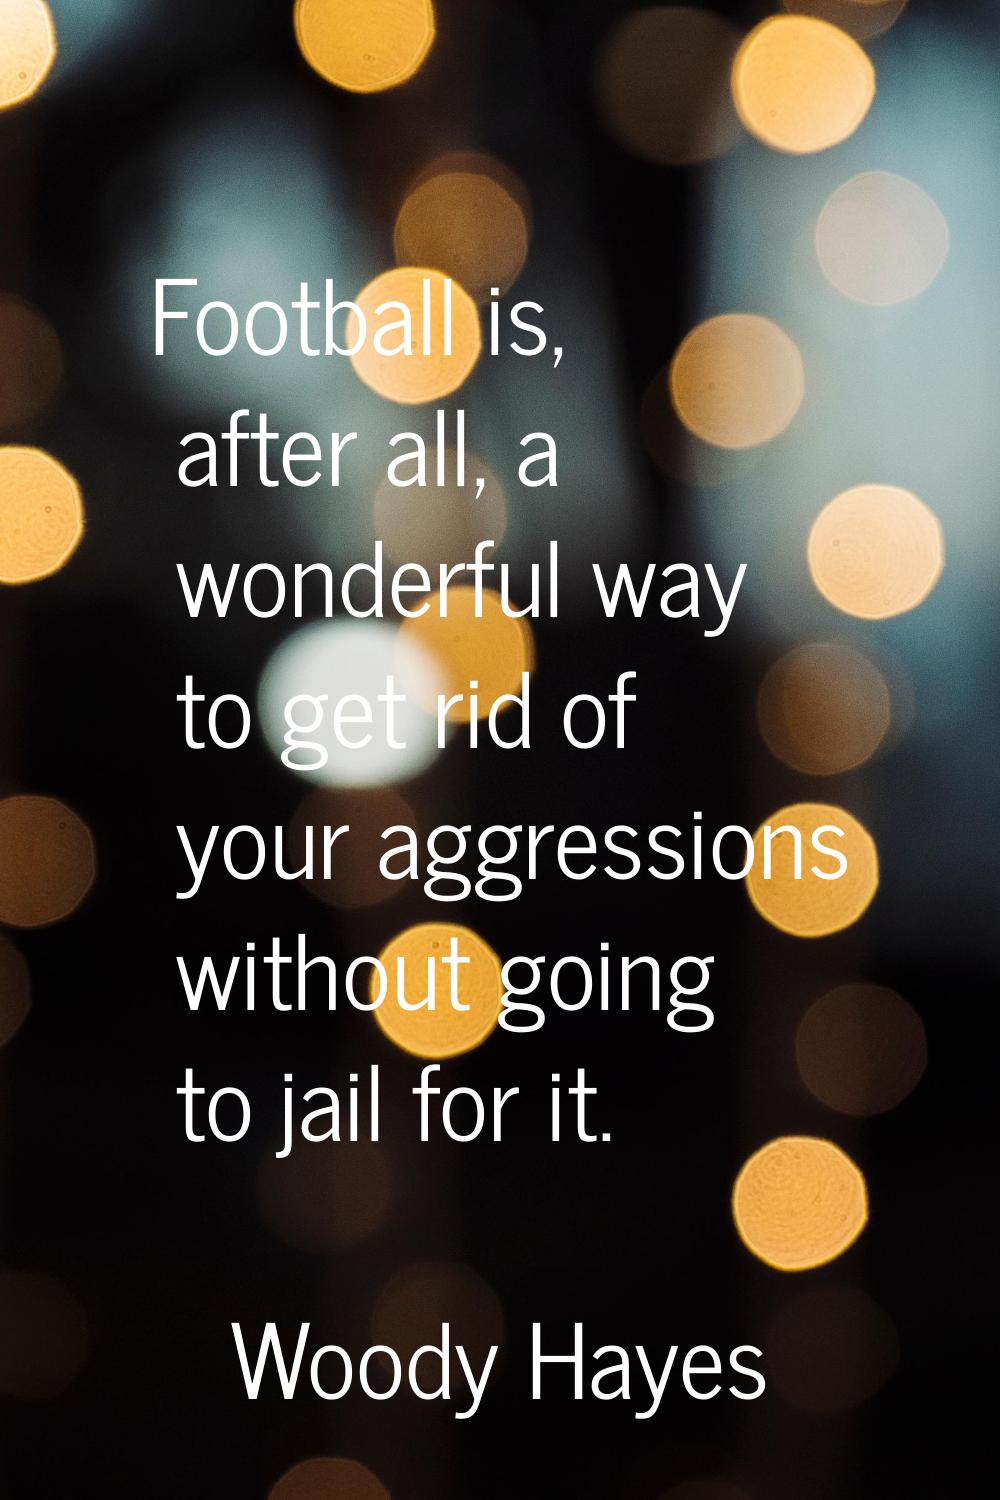 Football is, after all, a wonderful way to get rid of your aggressions without going to jail for it